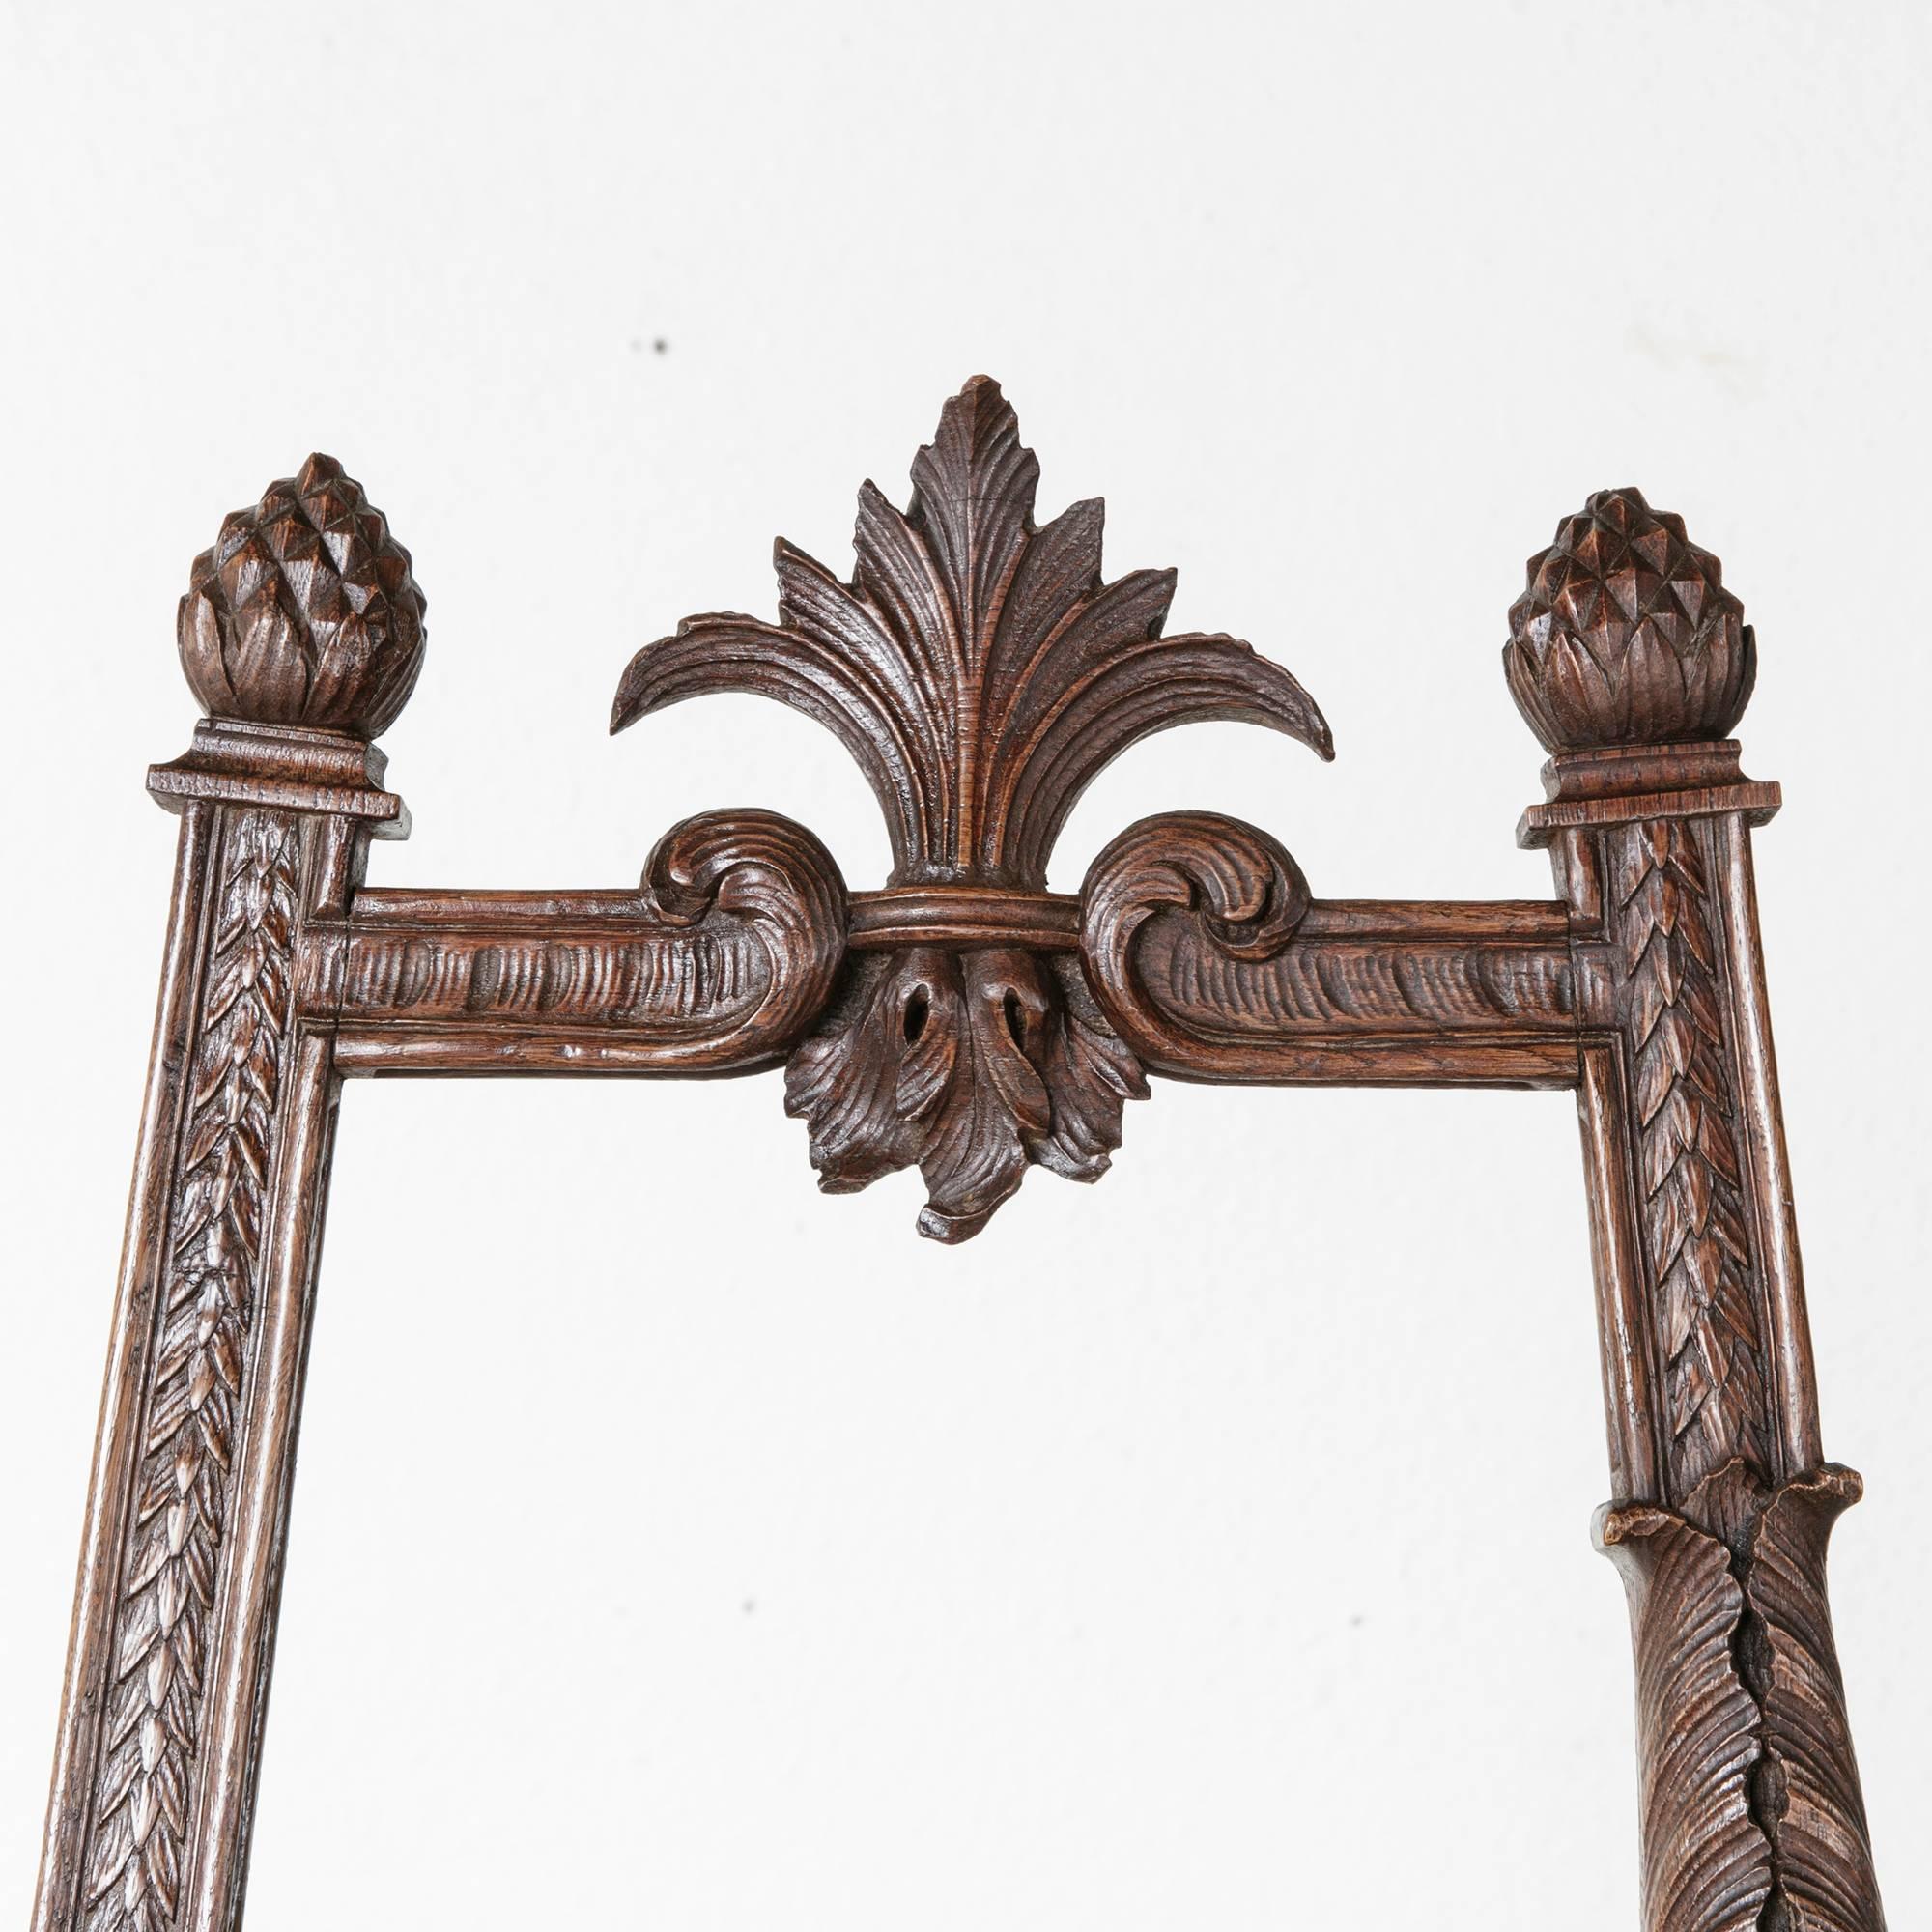 This unique floor easel of solid walnut features elaborately hand-carved pineapples, acanthus, and rosettes. With charming asymmetrically carved elements, this floor easel will make an excellent formal display for artwork or a sign in a floating